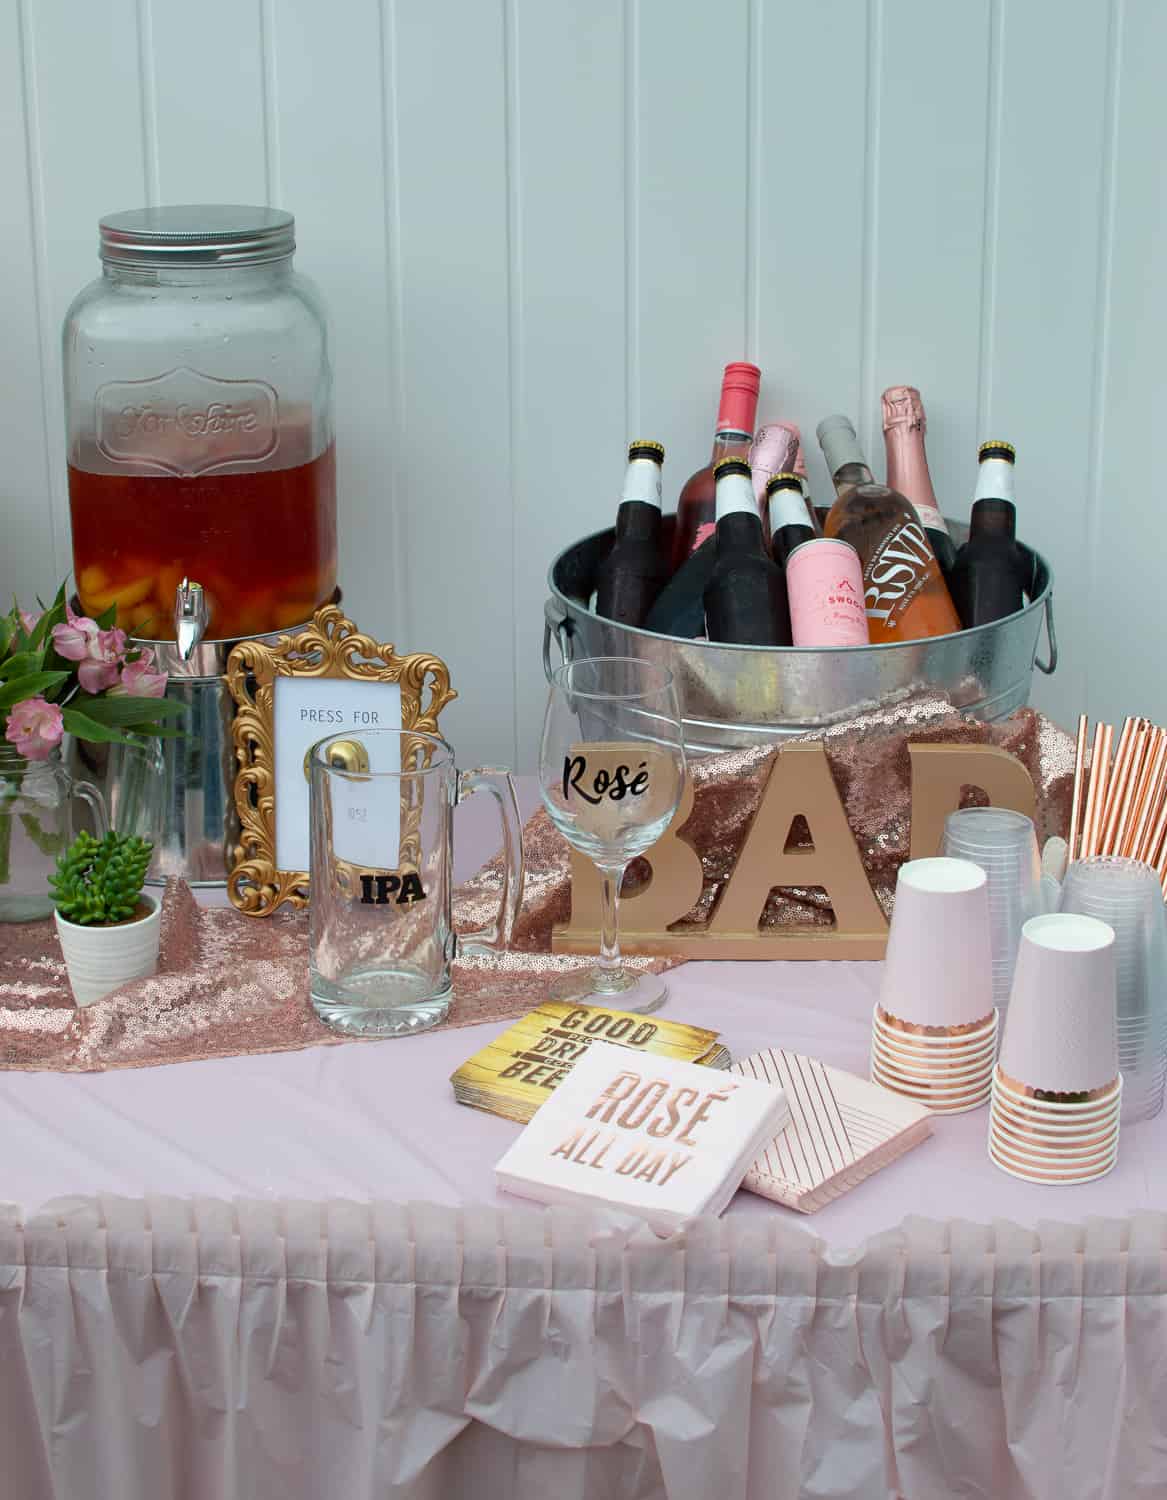 Rosé and IPA Wedding Shower Drinks Table